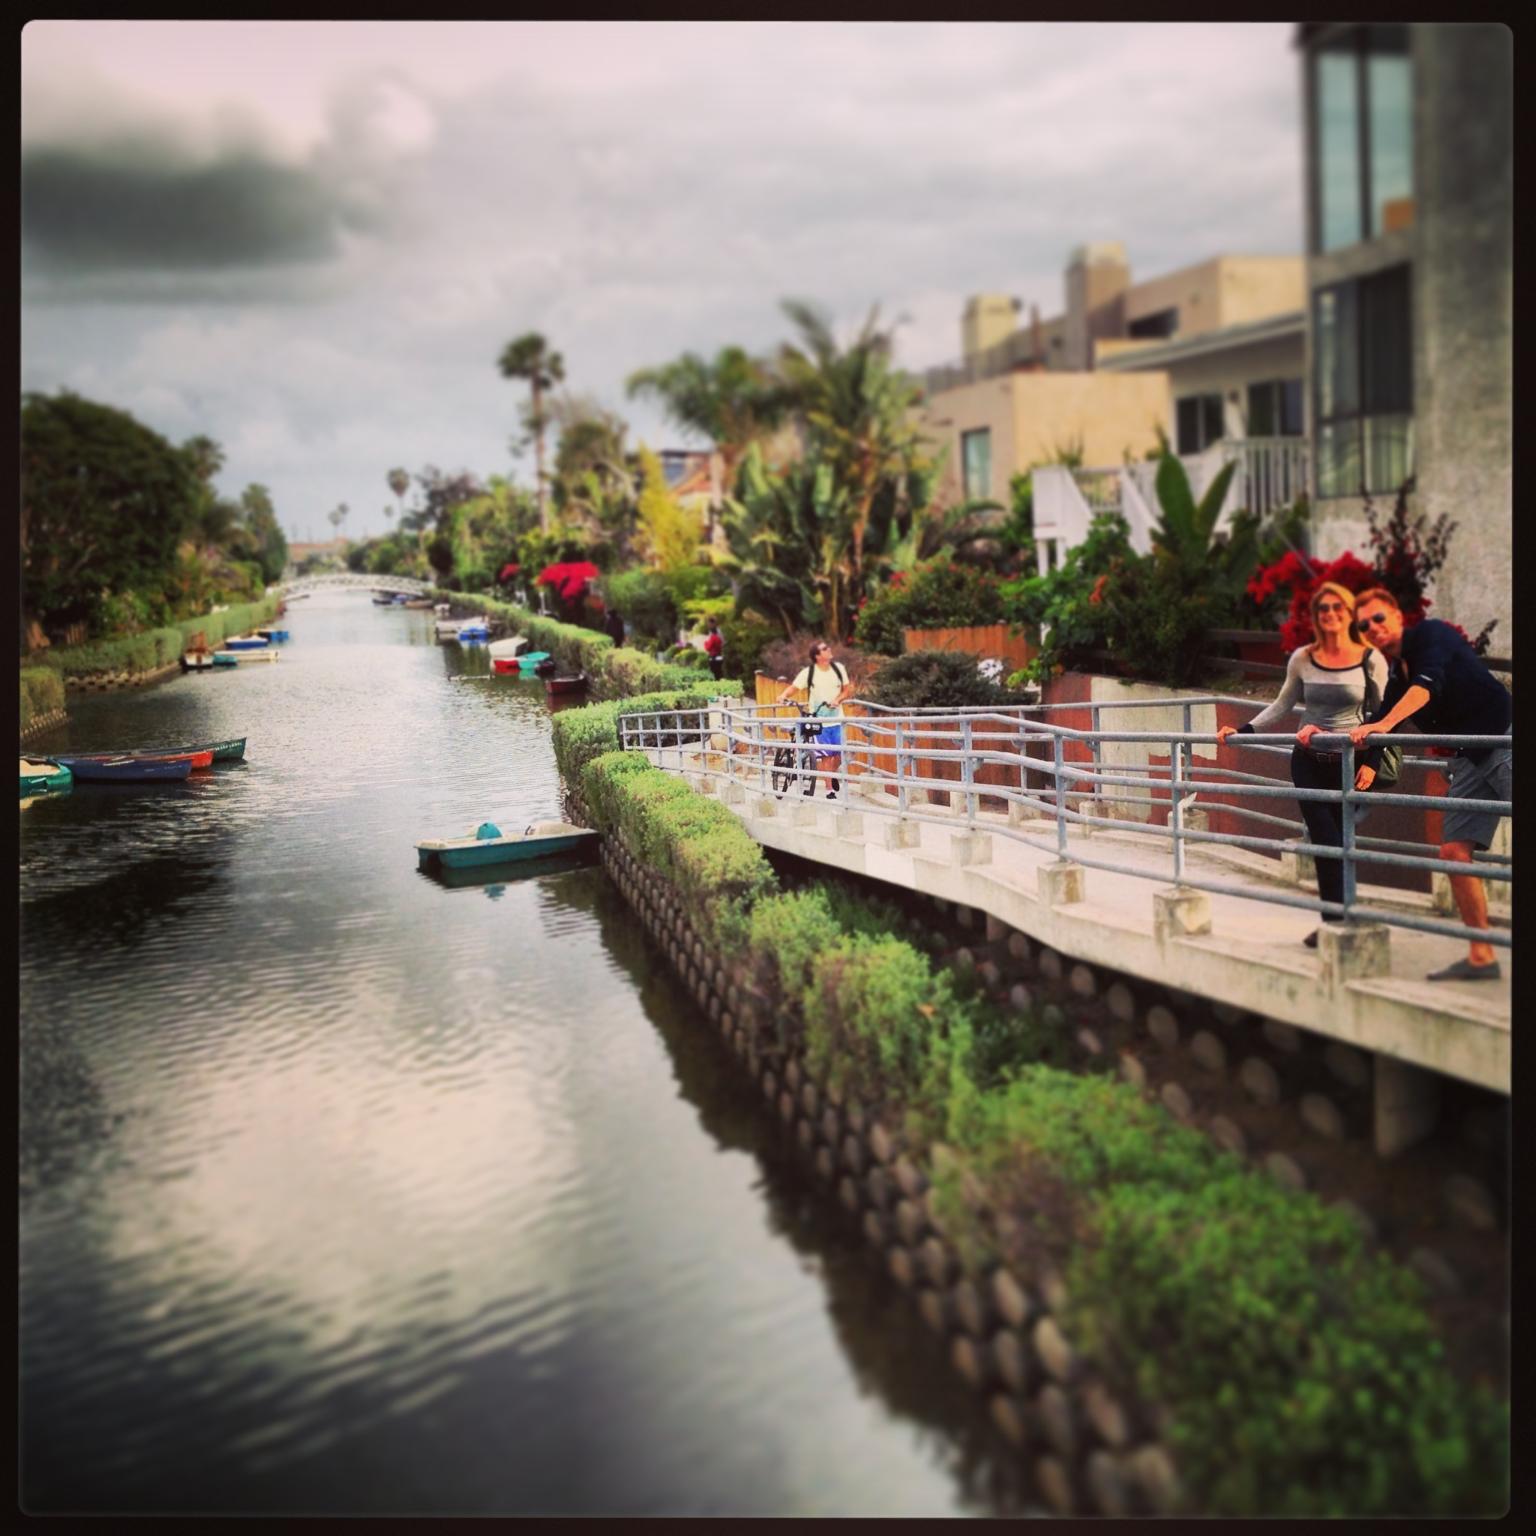 The canals of Venice, California